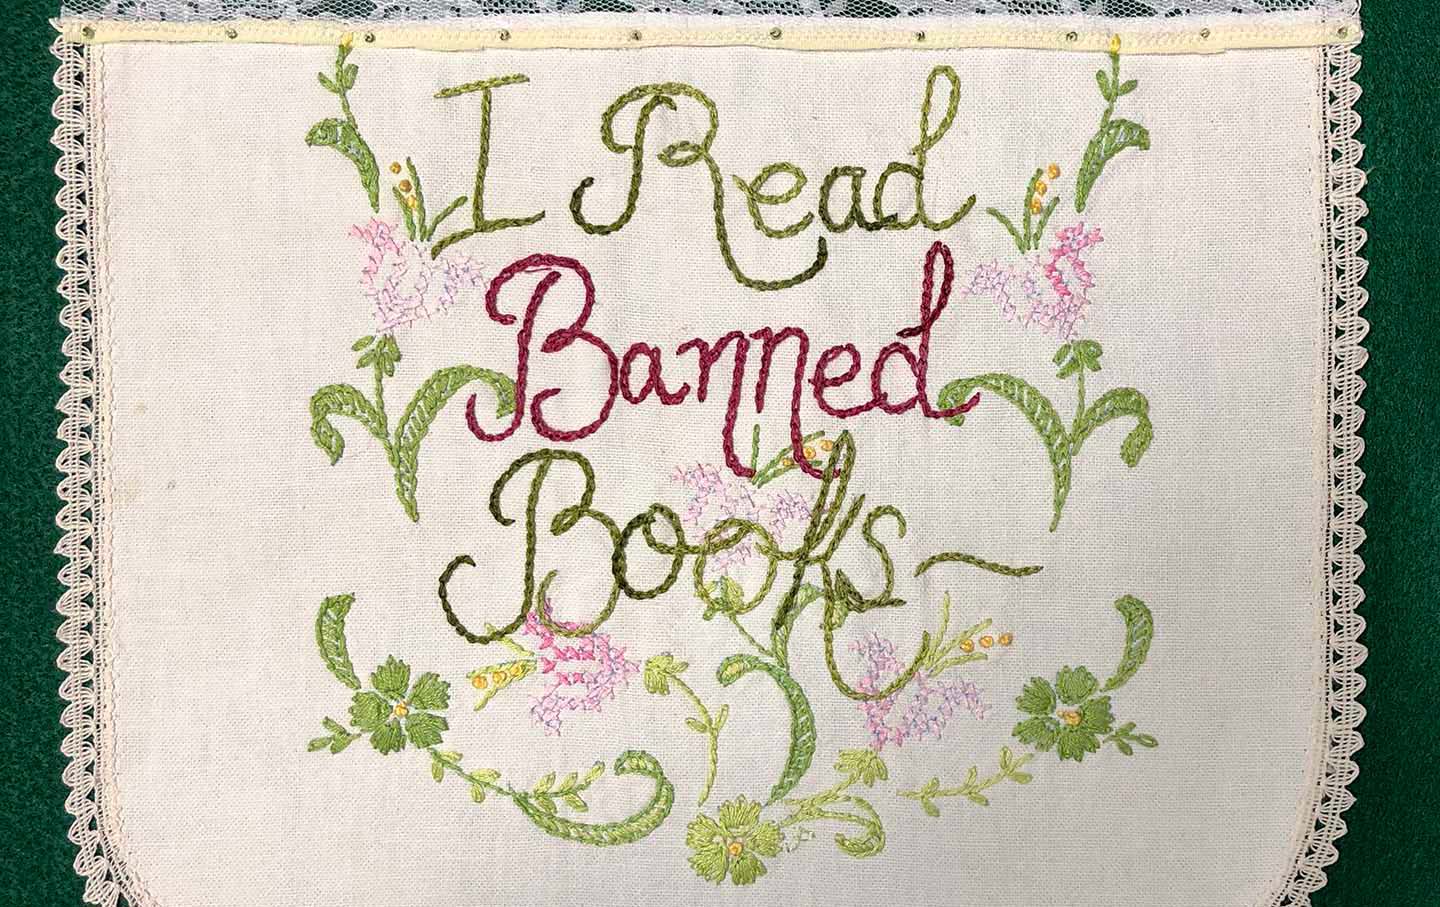 Read Banned Books!